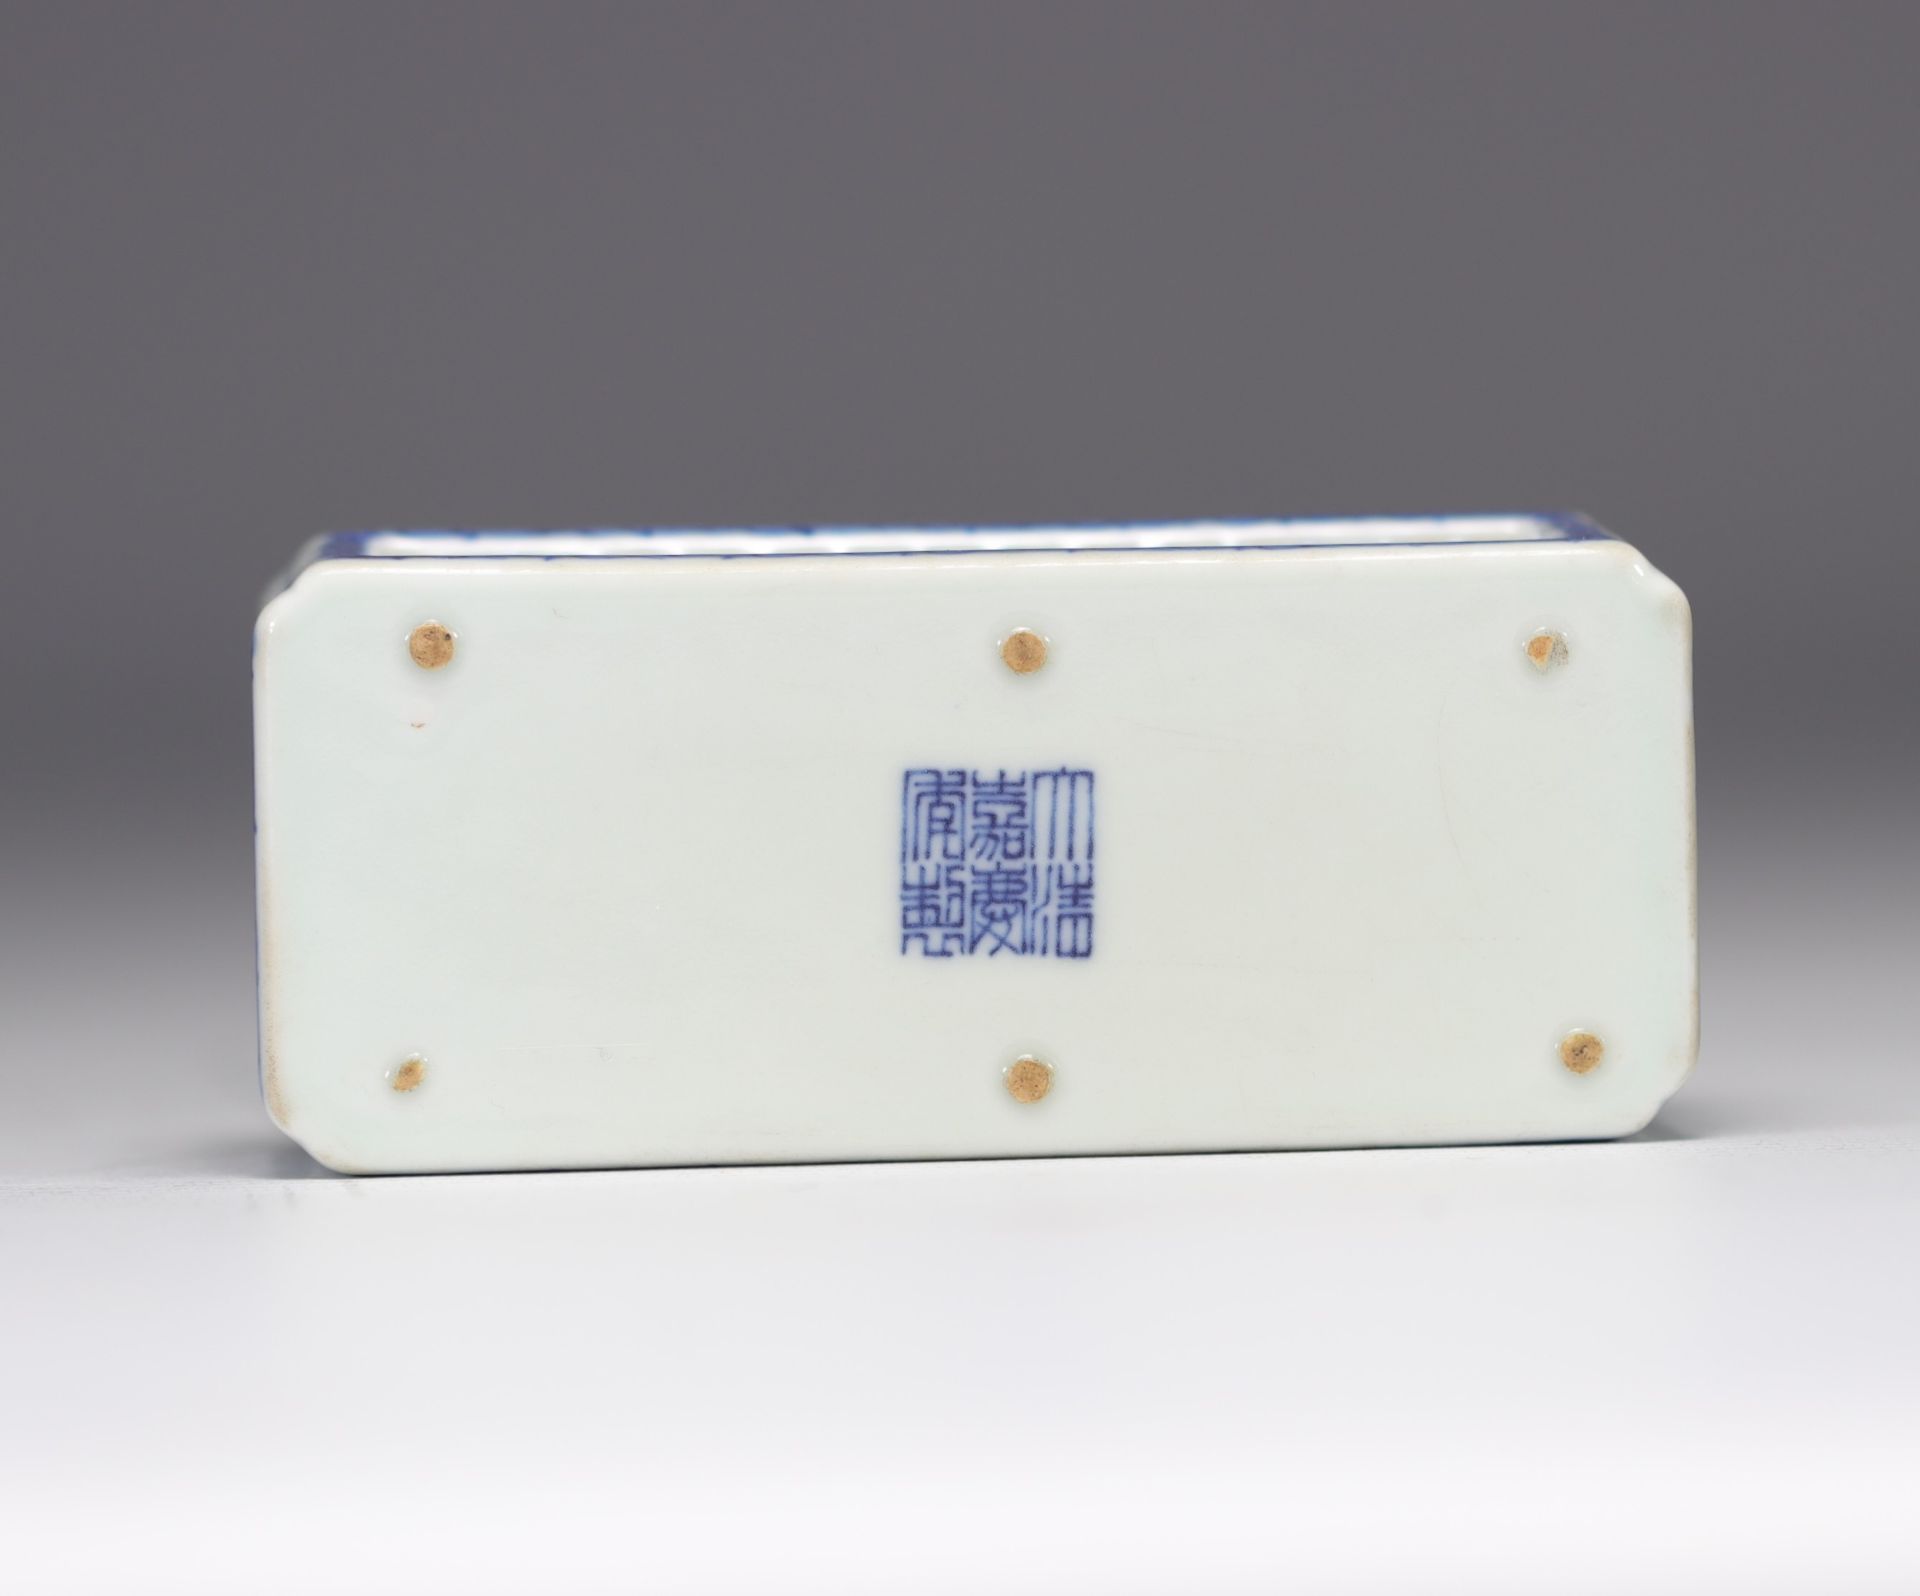 Porcelain cricket box in white and blue Qianlong brand - Image 2 of 4